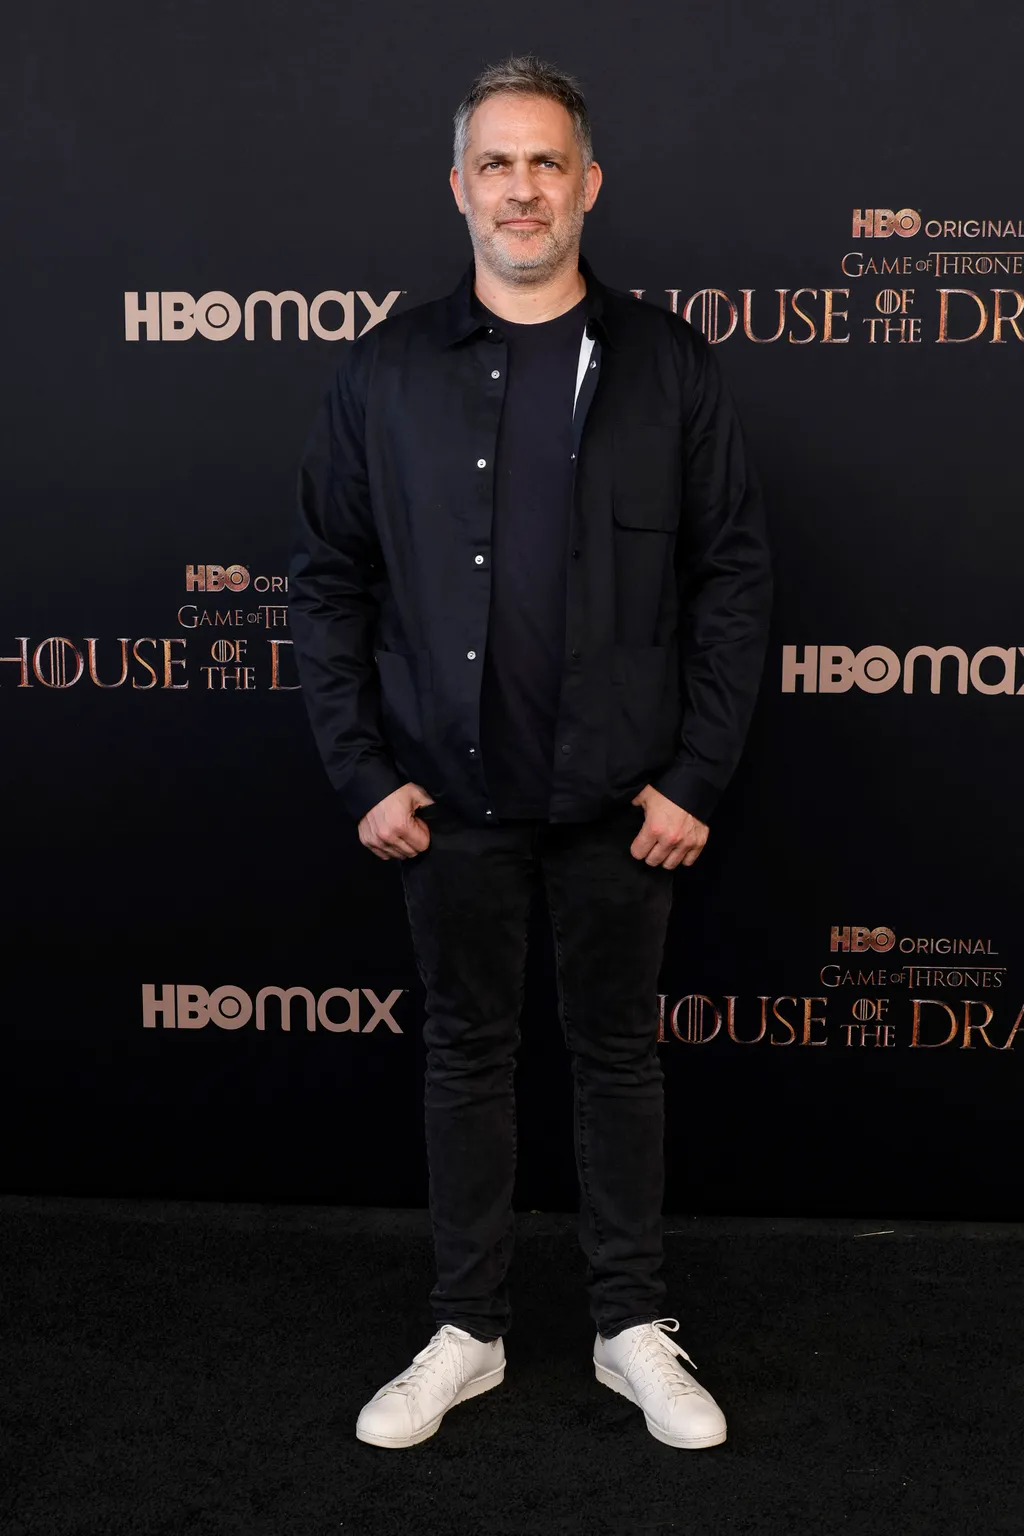 HBO Original Drama Series "House Of The Dragon" World Premiere - Arrivals GettyImageRank2 arts culture and entertainment celebrities Vertical 